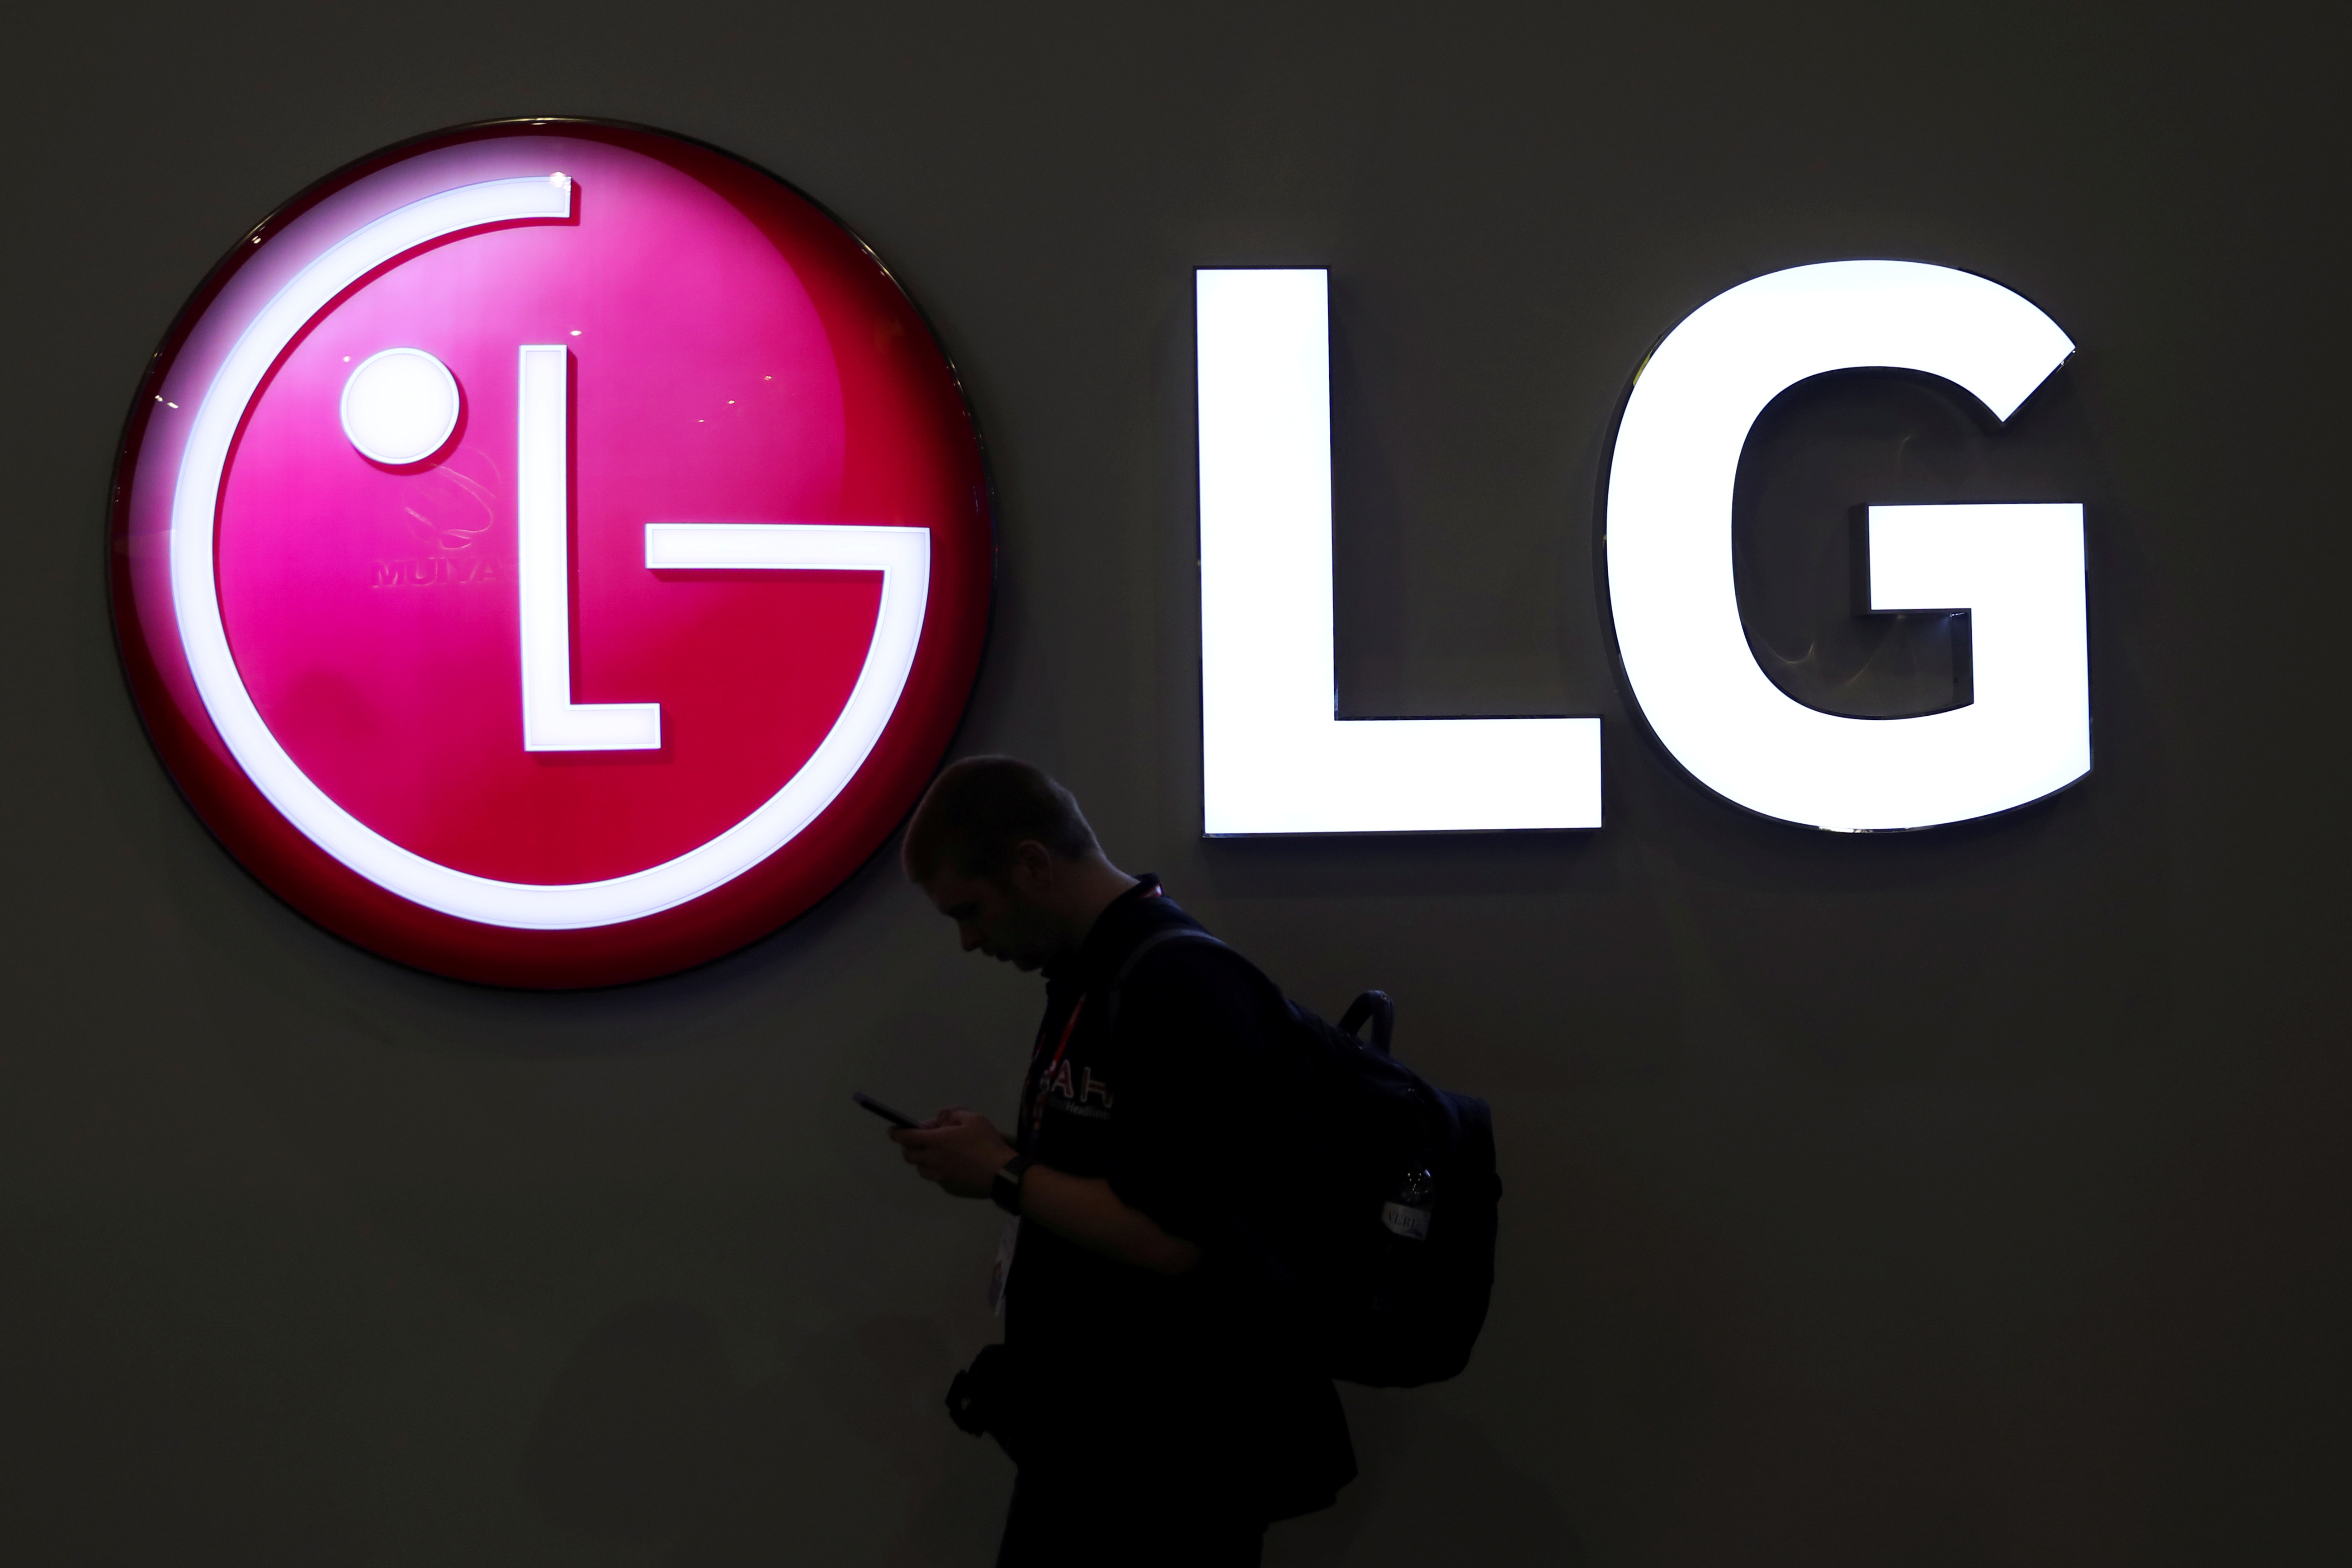 A man walks past an LG logo at the Mobile World Congress in Barcelona